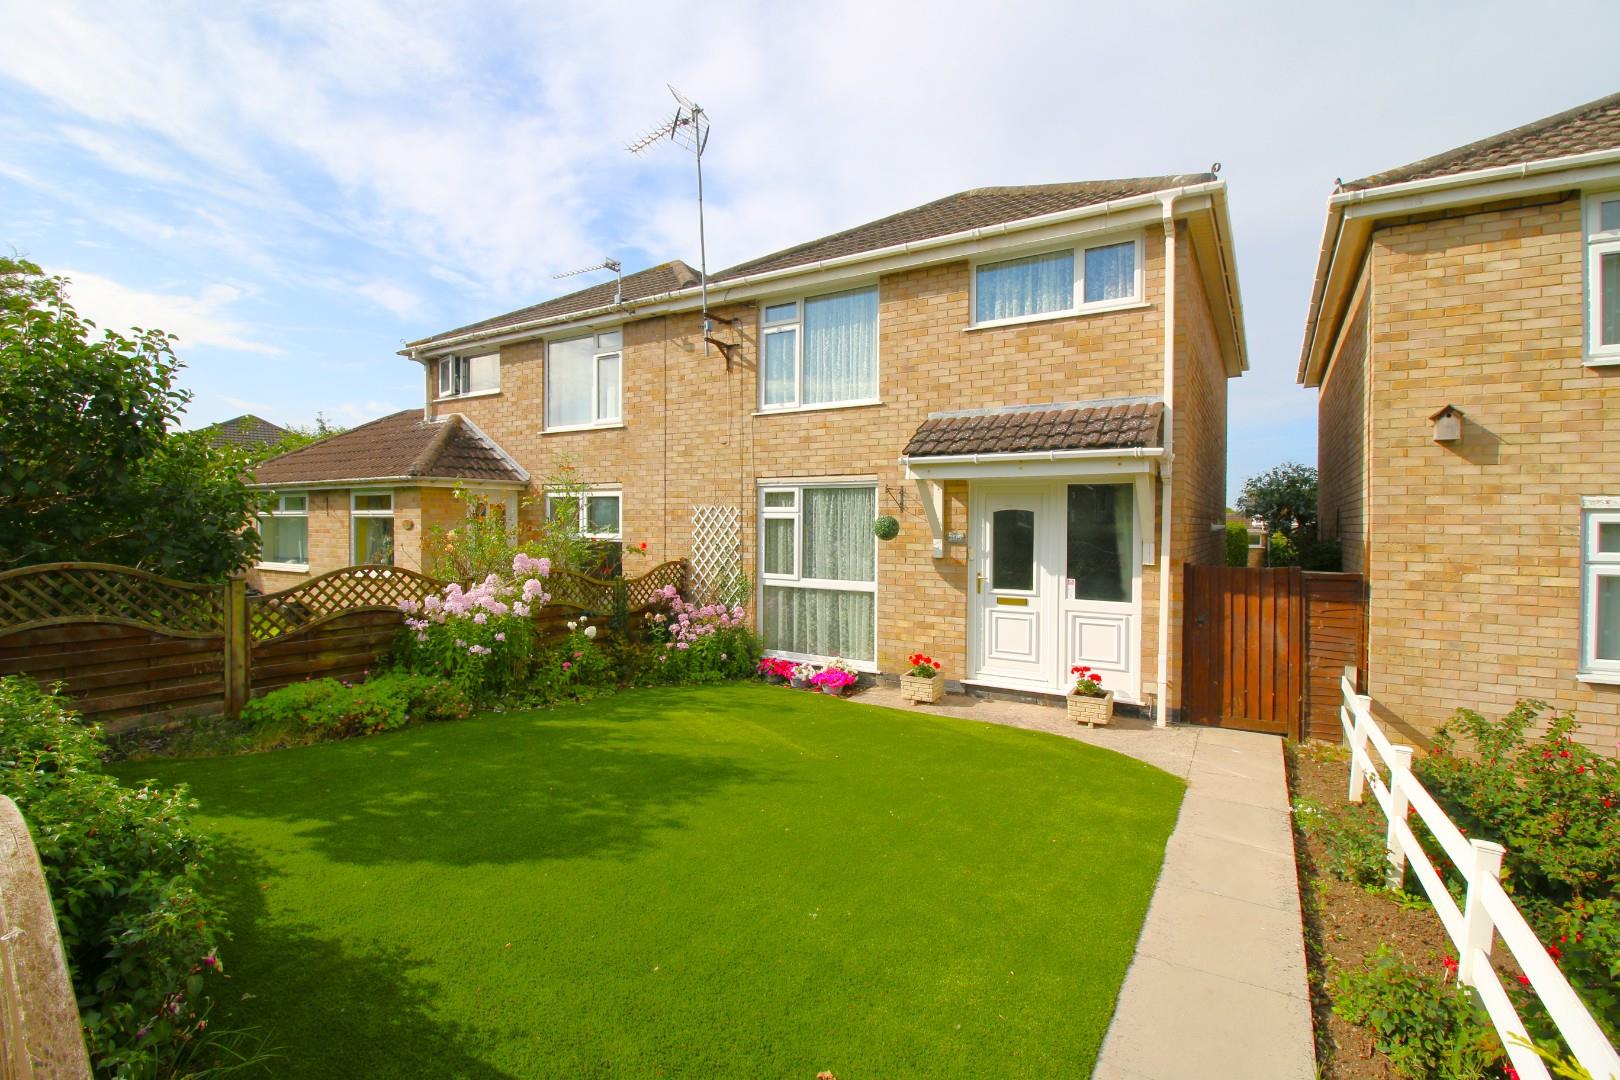 Family home in central Yatton